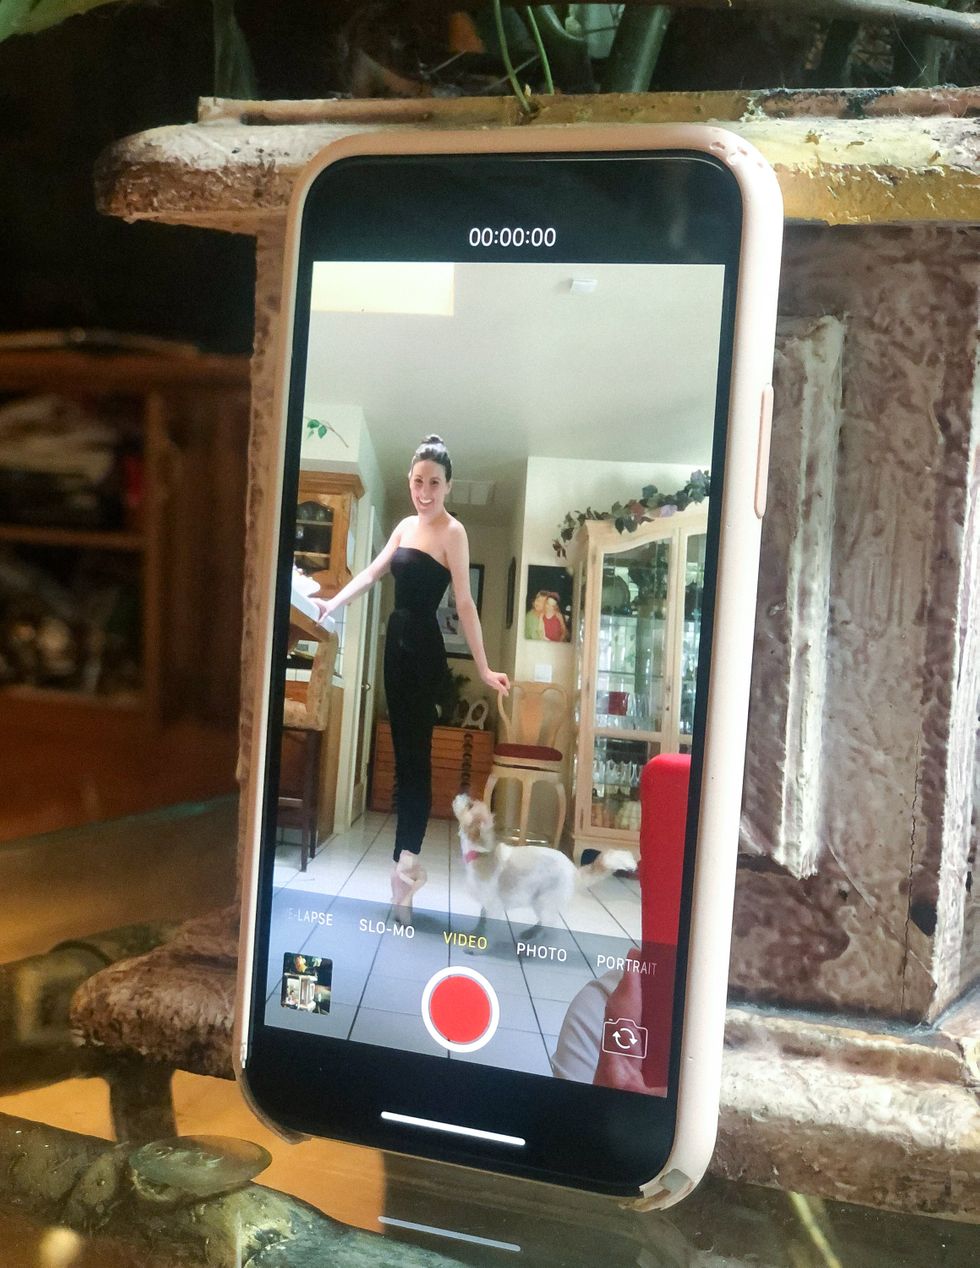 A smartphone, showing Tiler Peck standing on pointe in her living room with a dog, is propped up on a glass table.